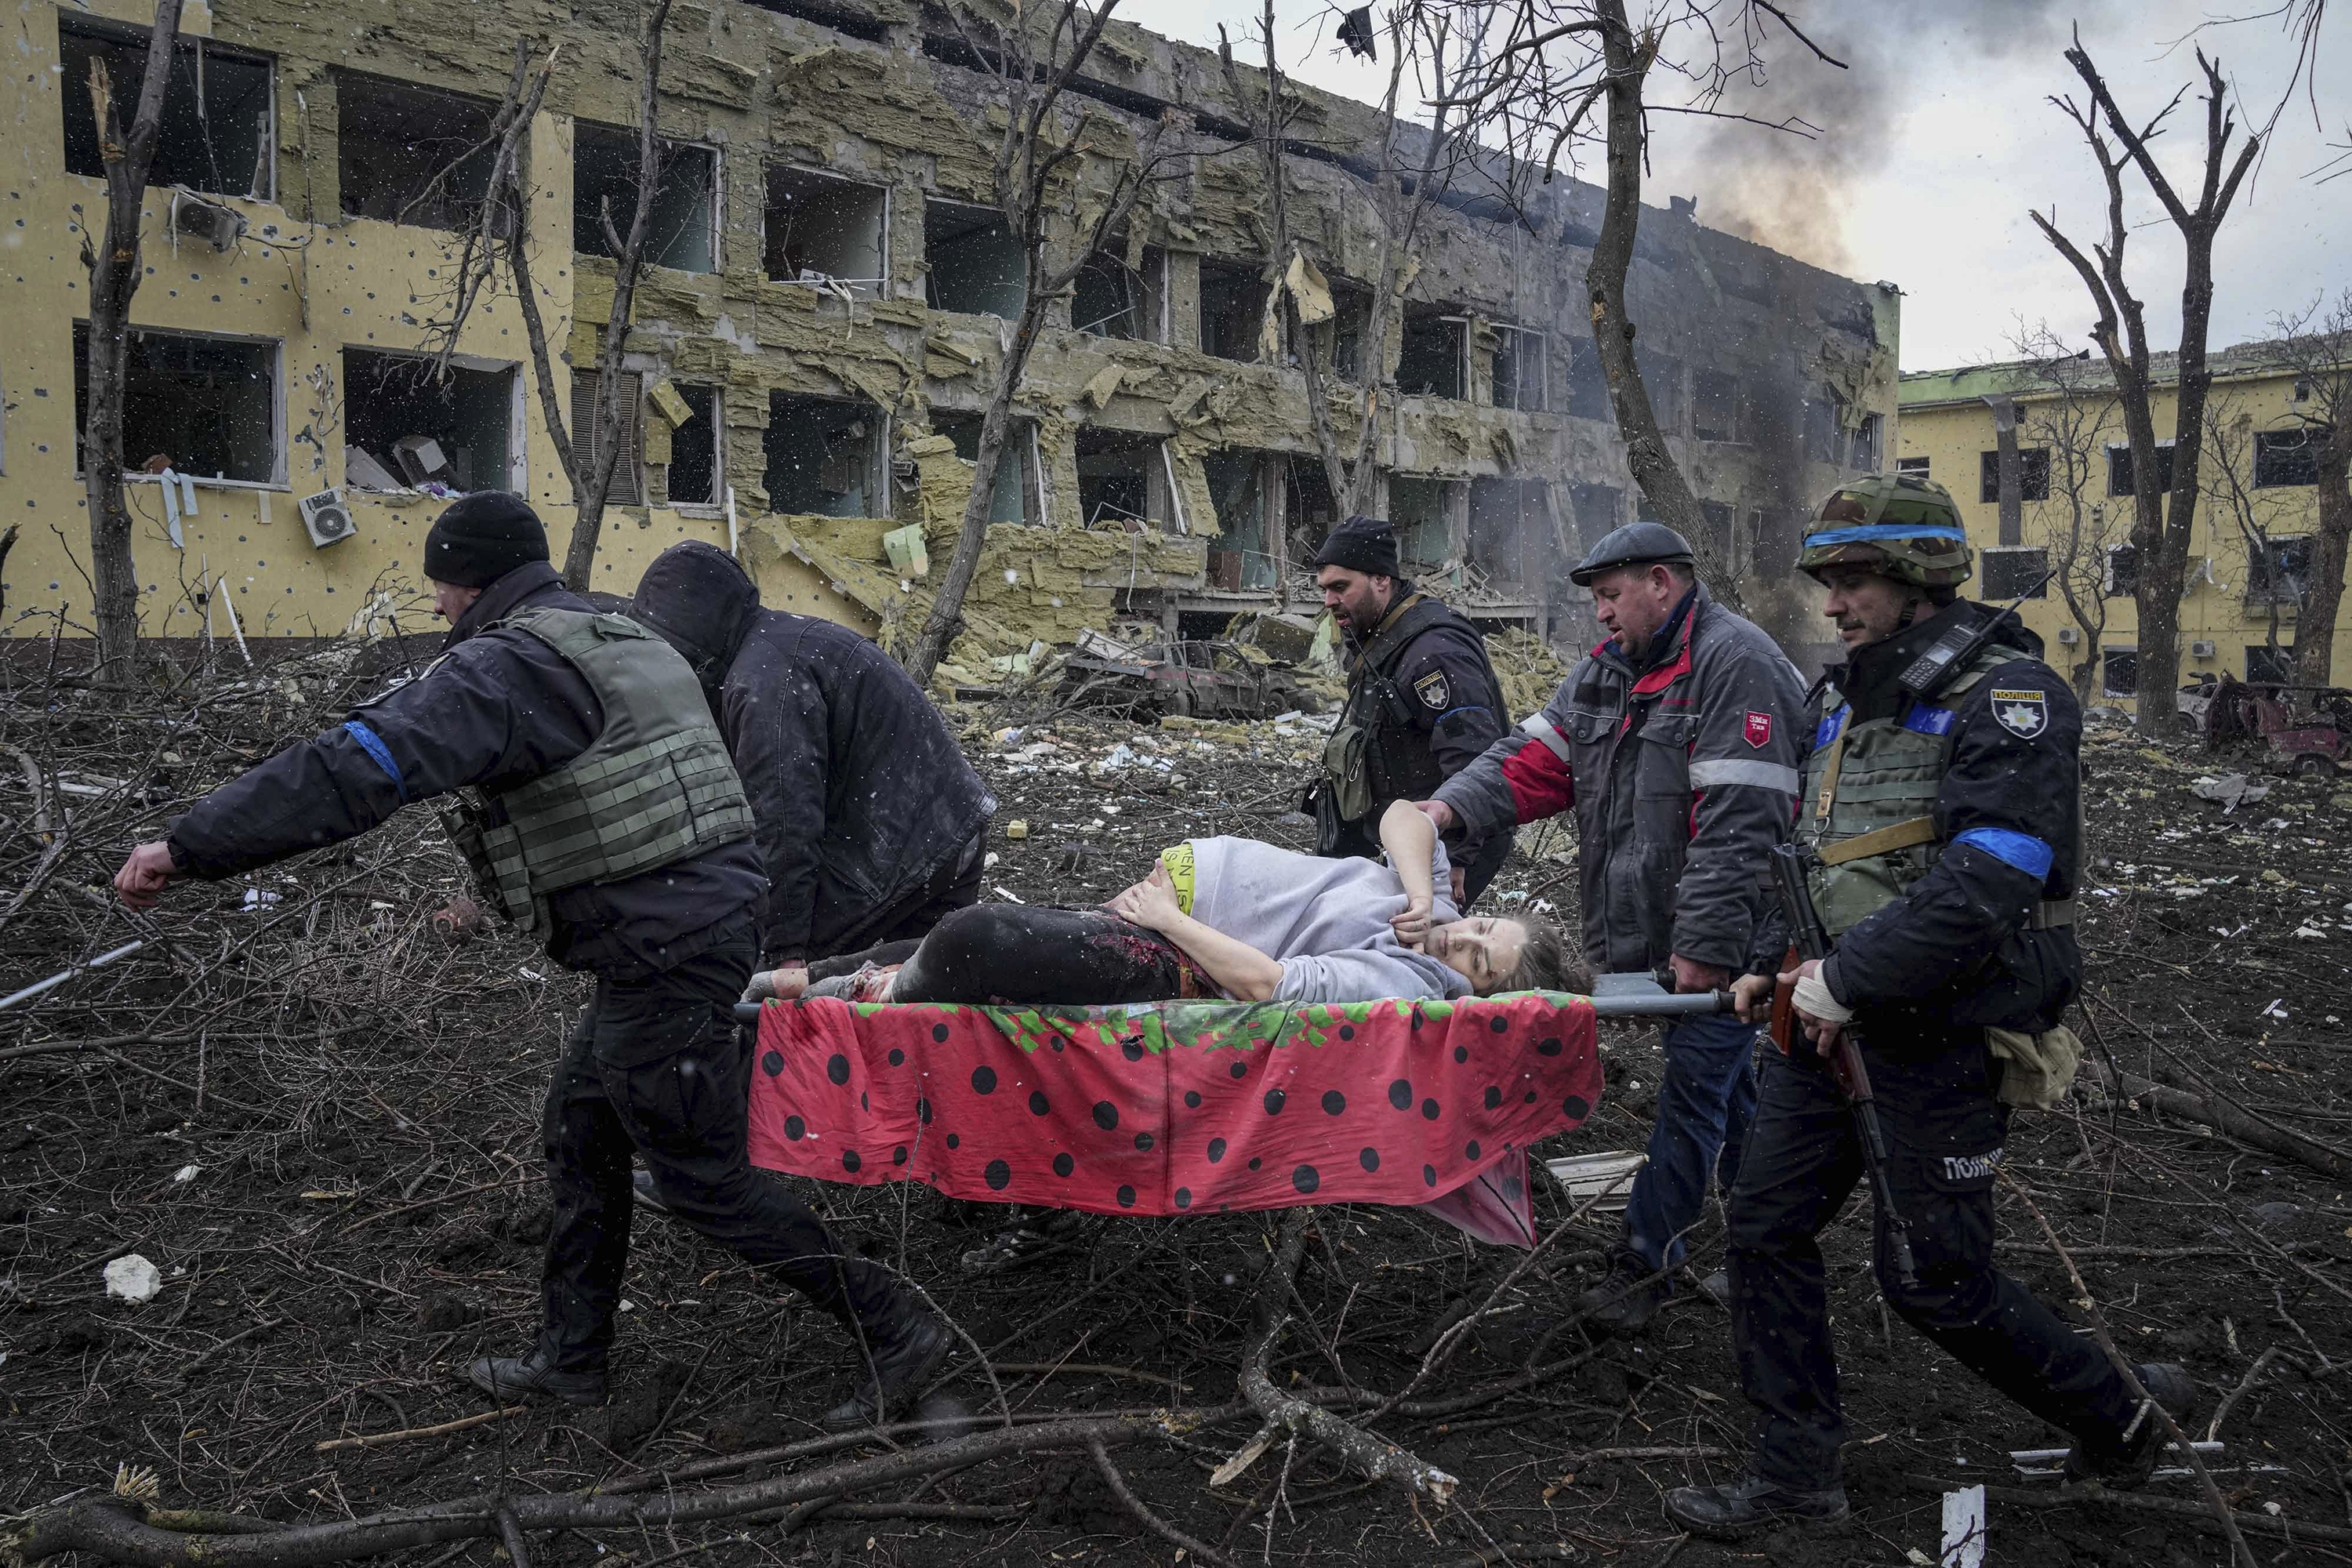 Ukrainian emergency employees and volunteers carry an injured pregnant woman from the maternity hospital in Mariupol, Ukraine, on March 9.